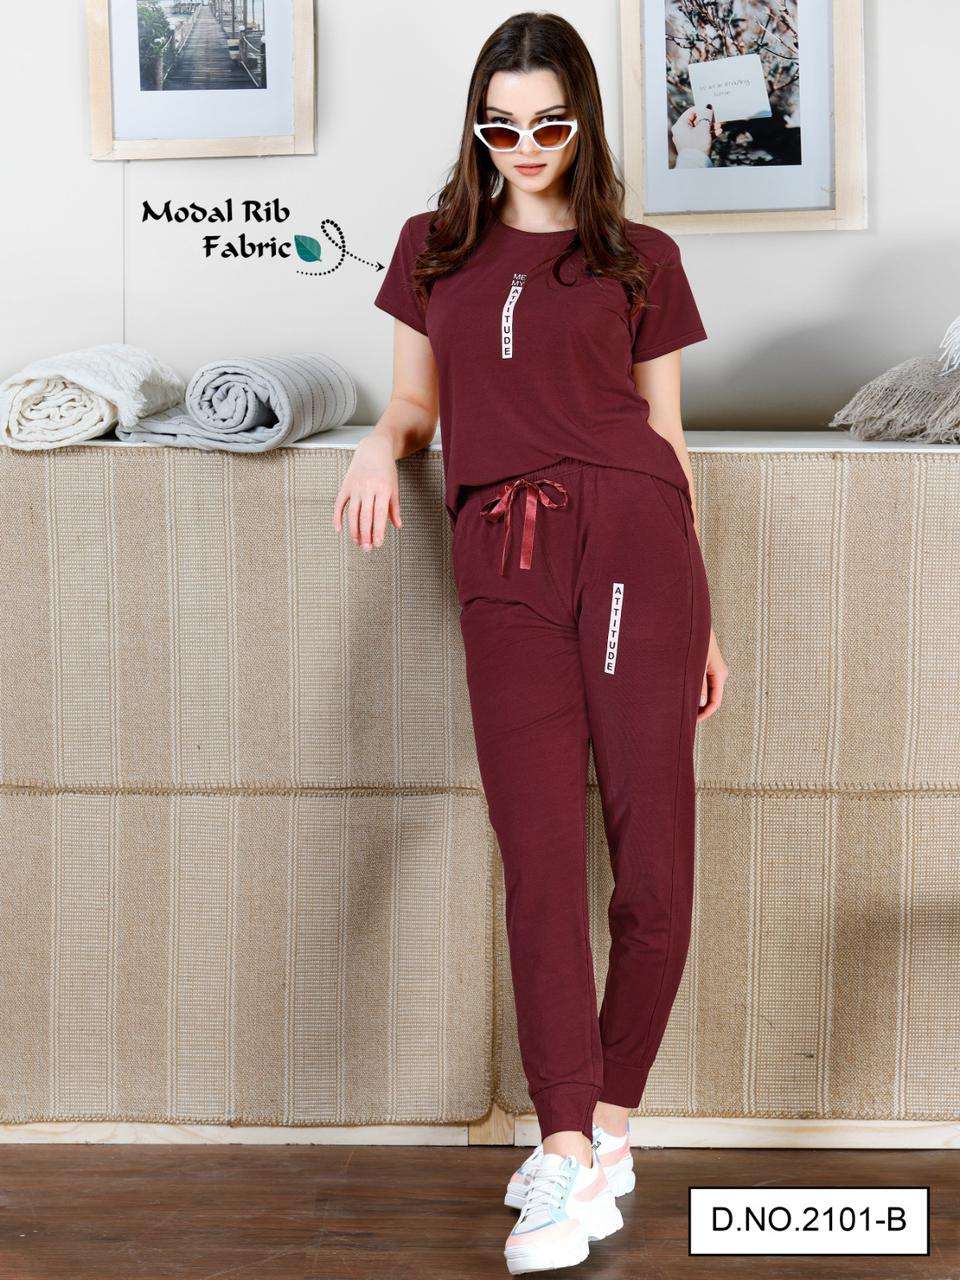 permium mermaid nightsuit collection girlish stylish coord set for nightwear and sports wear girls and womens stylish tshirt and pyjama coord set nightsuit women n girls